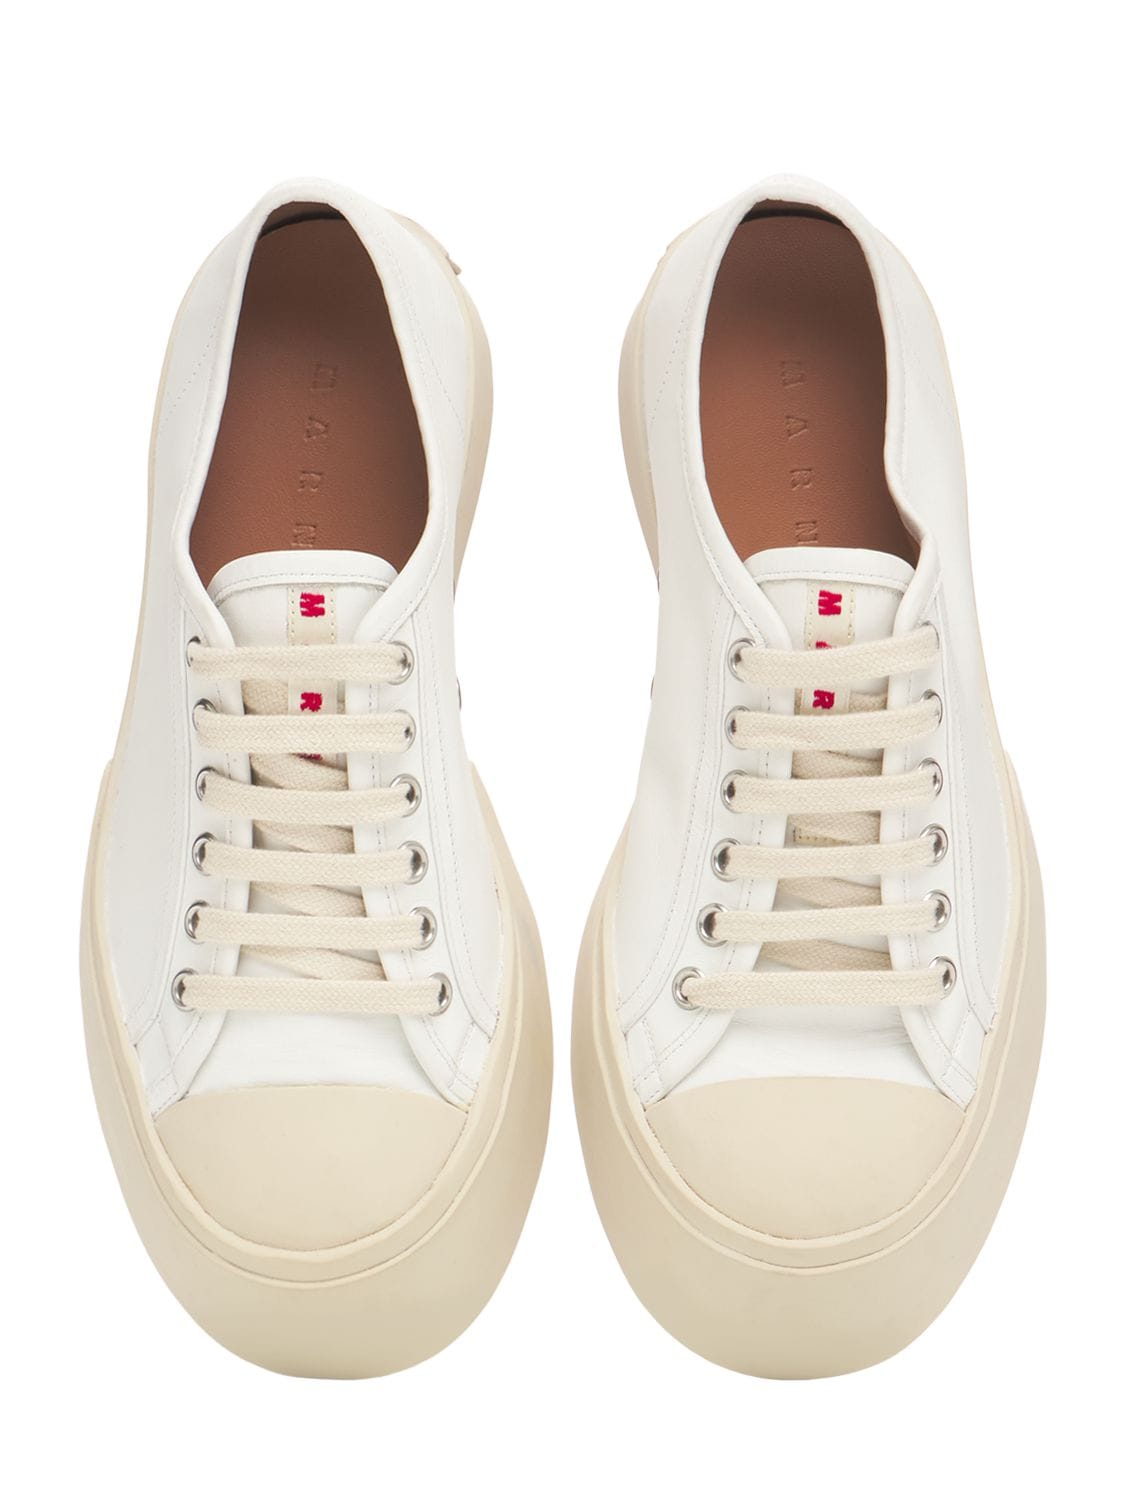 Shop Marni 20mm Pablo Leather Sneakers In White